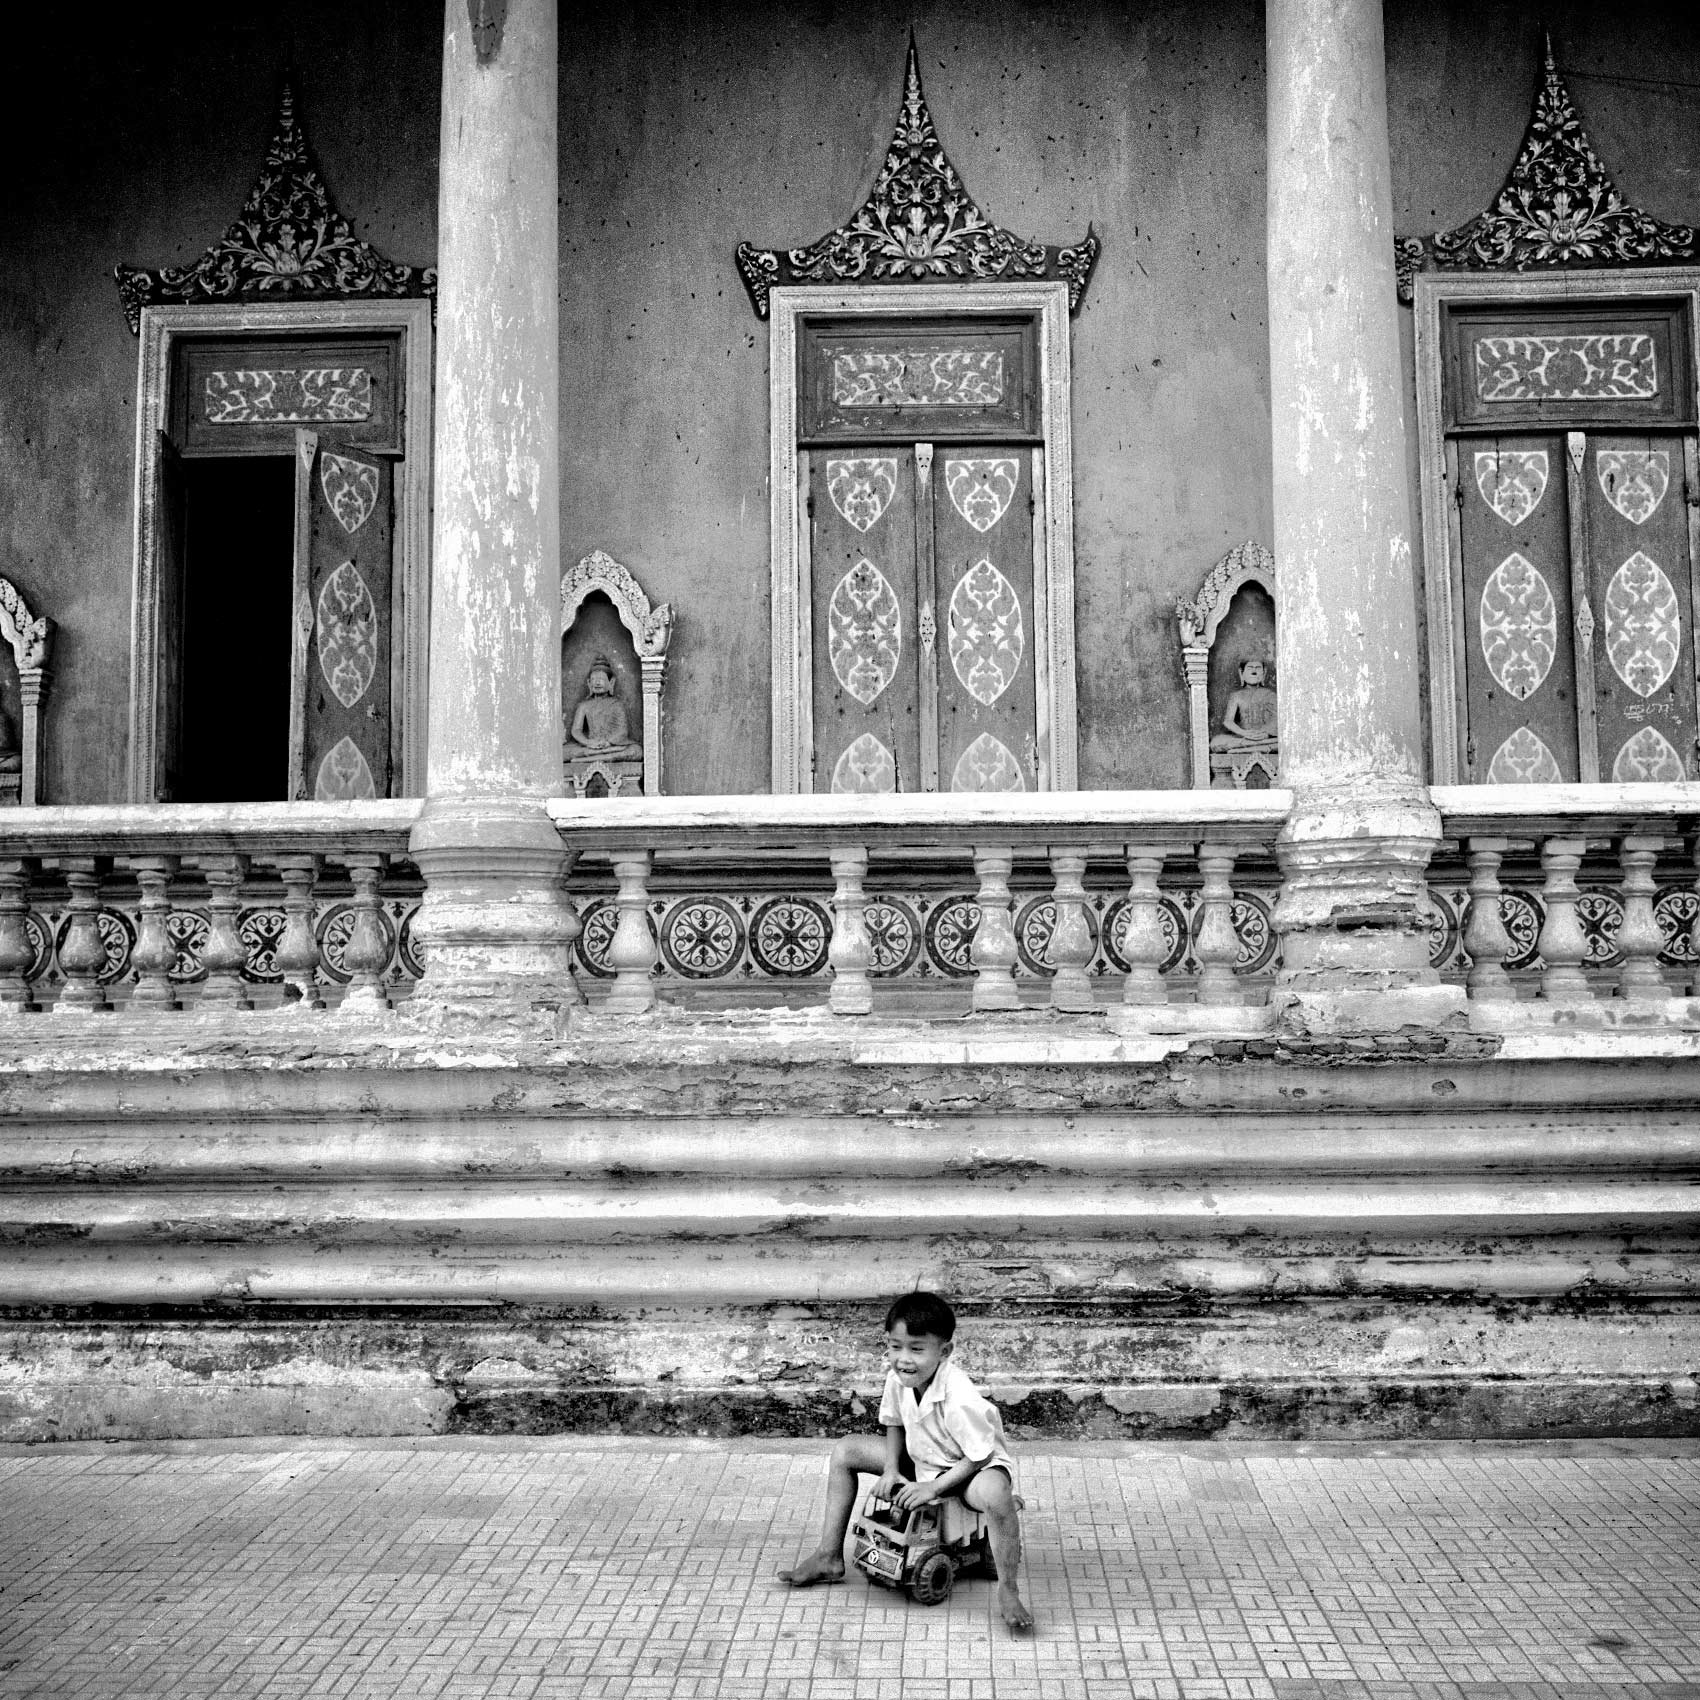 a-young-boy-plays-on-his-toy-truck-outside-a-buddhist-temple-in-bangkok-thailand